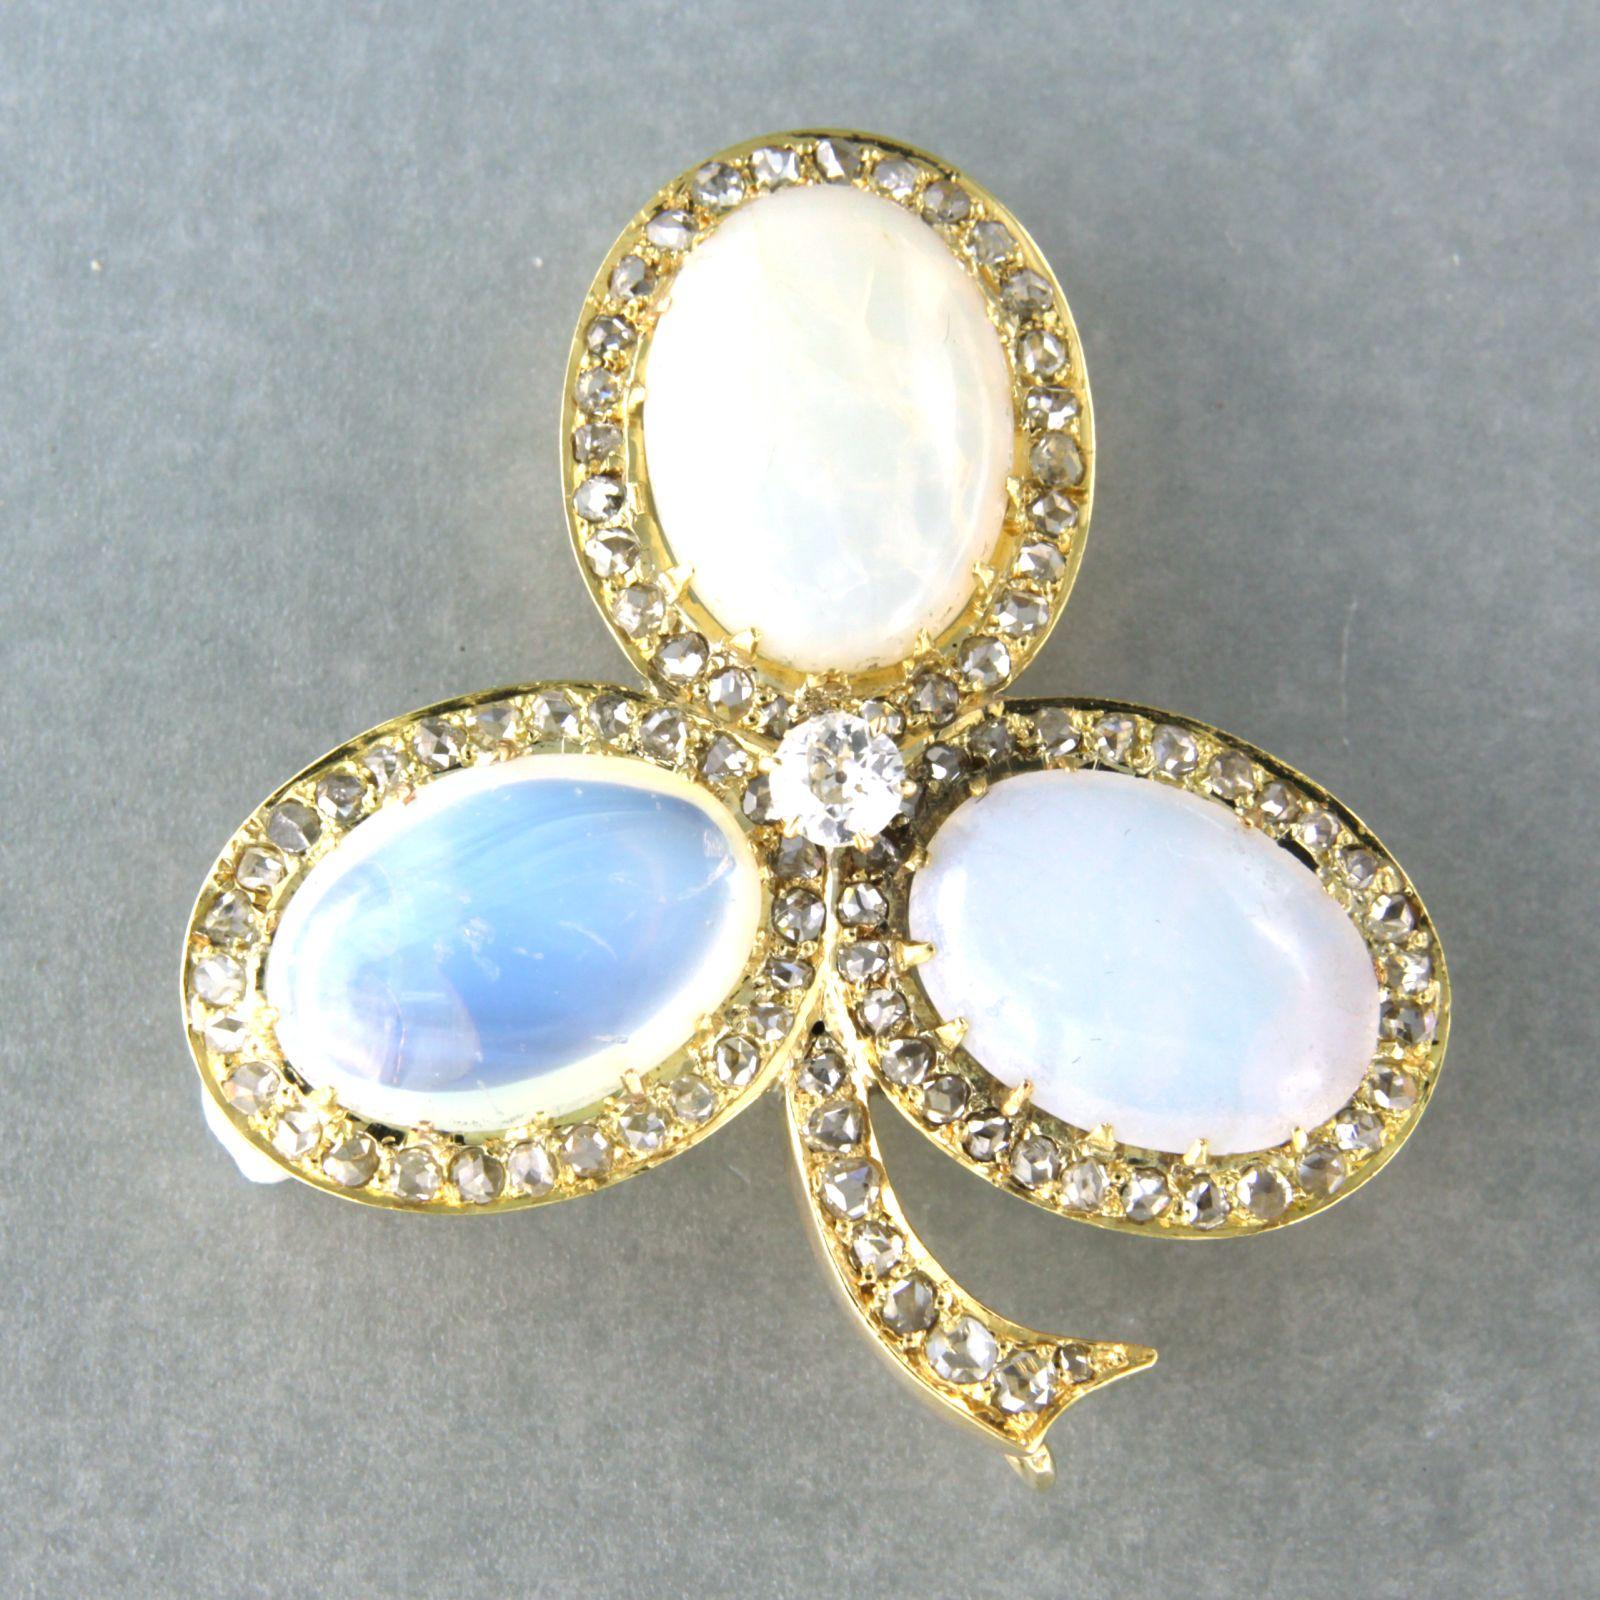 14k yellow gold brooch in the shape of a leaf with opal and old mine cut and rose cut diamonds, approximately 1.30ct in total – H/I – SI

Detailed description

the size of the brooch is 4.2 cm long by 3.9 cm wide

weight 11.8 grams

set with

- 3 x